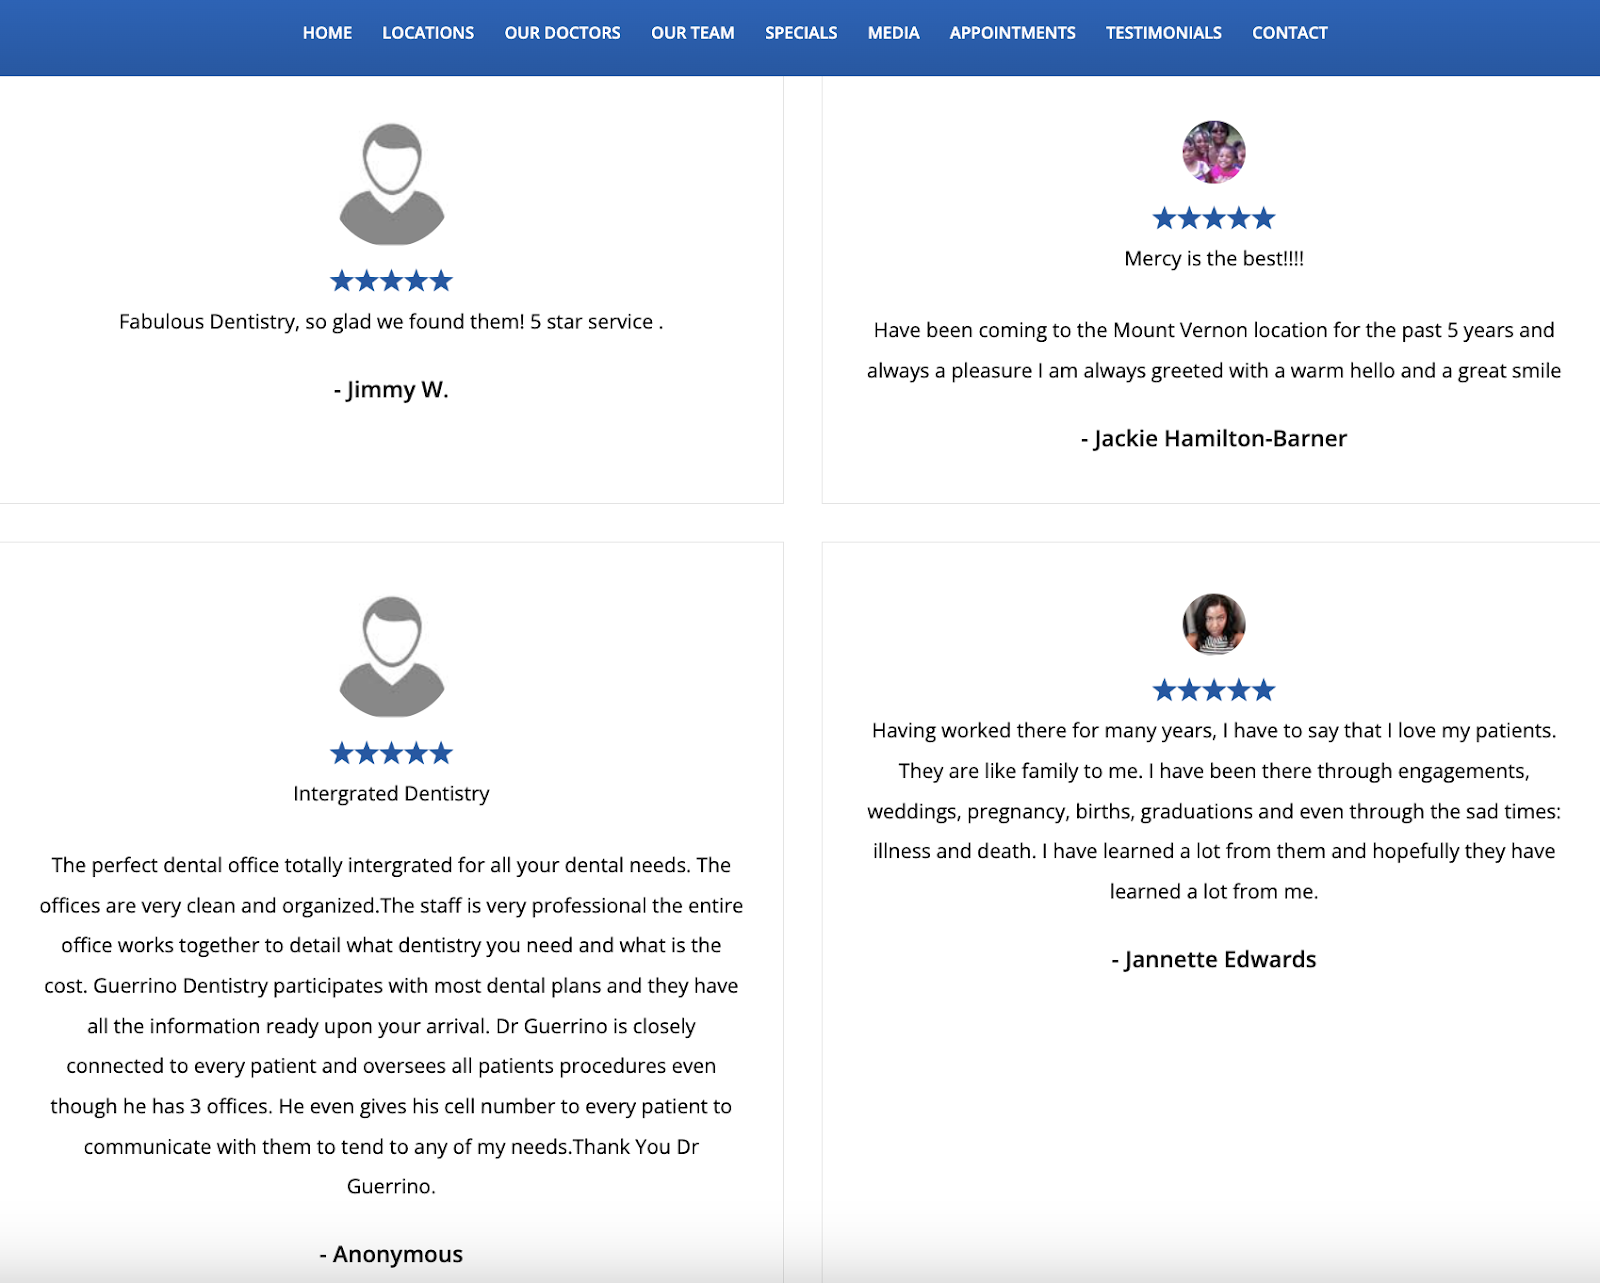 Leverage Patient Testimonials and Reviews